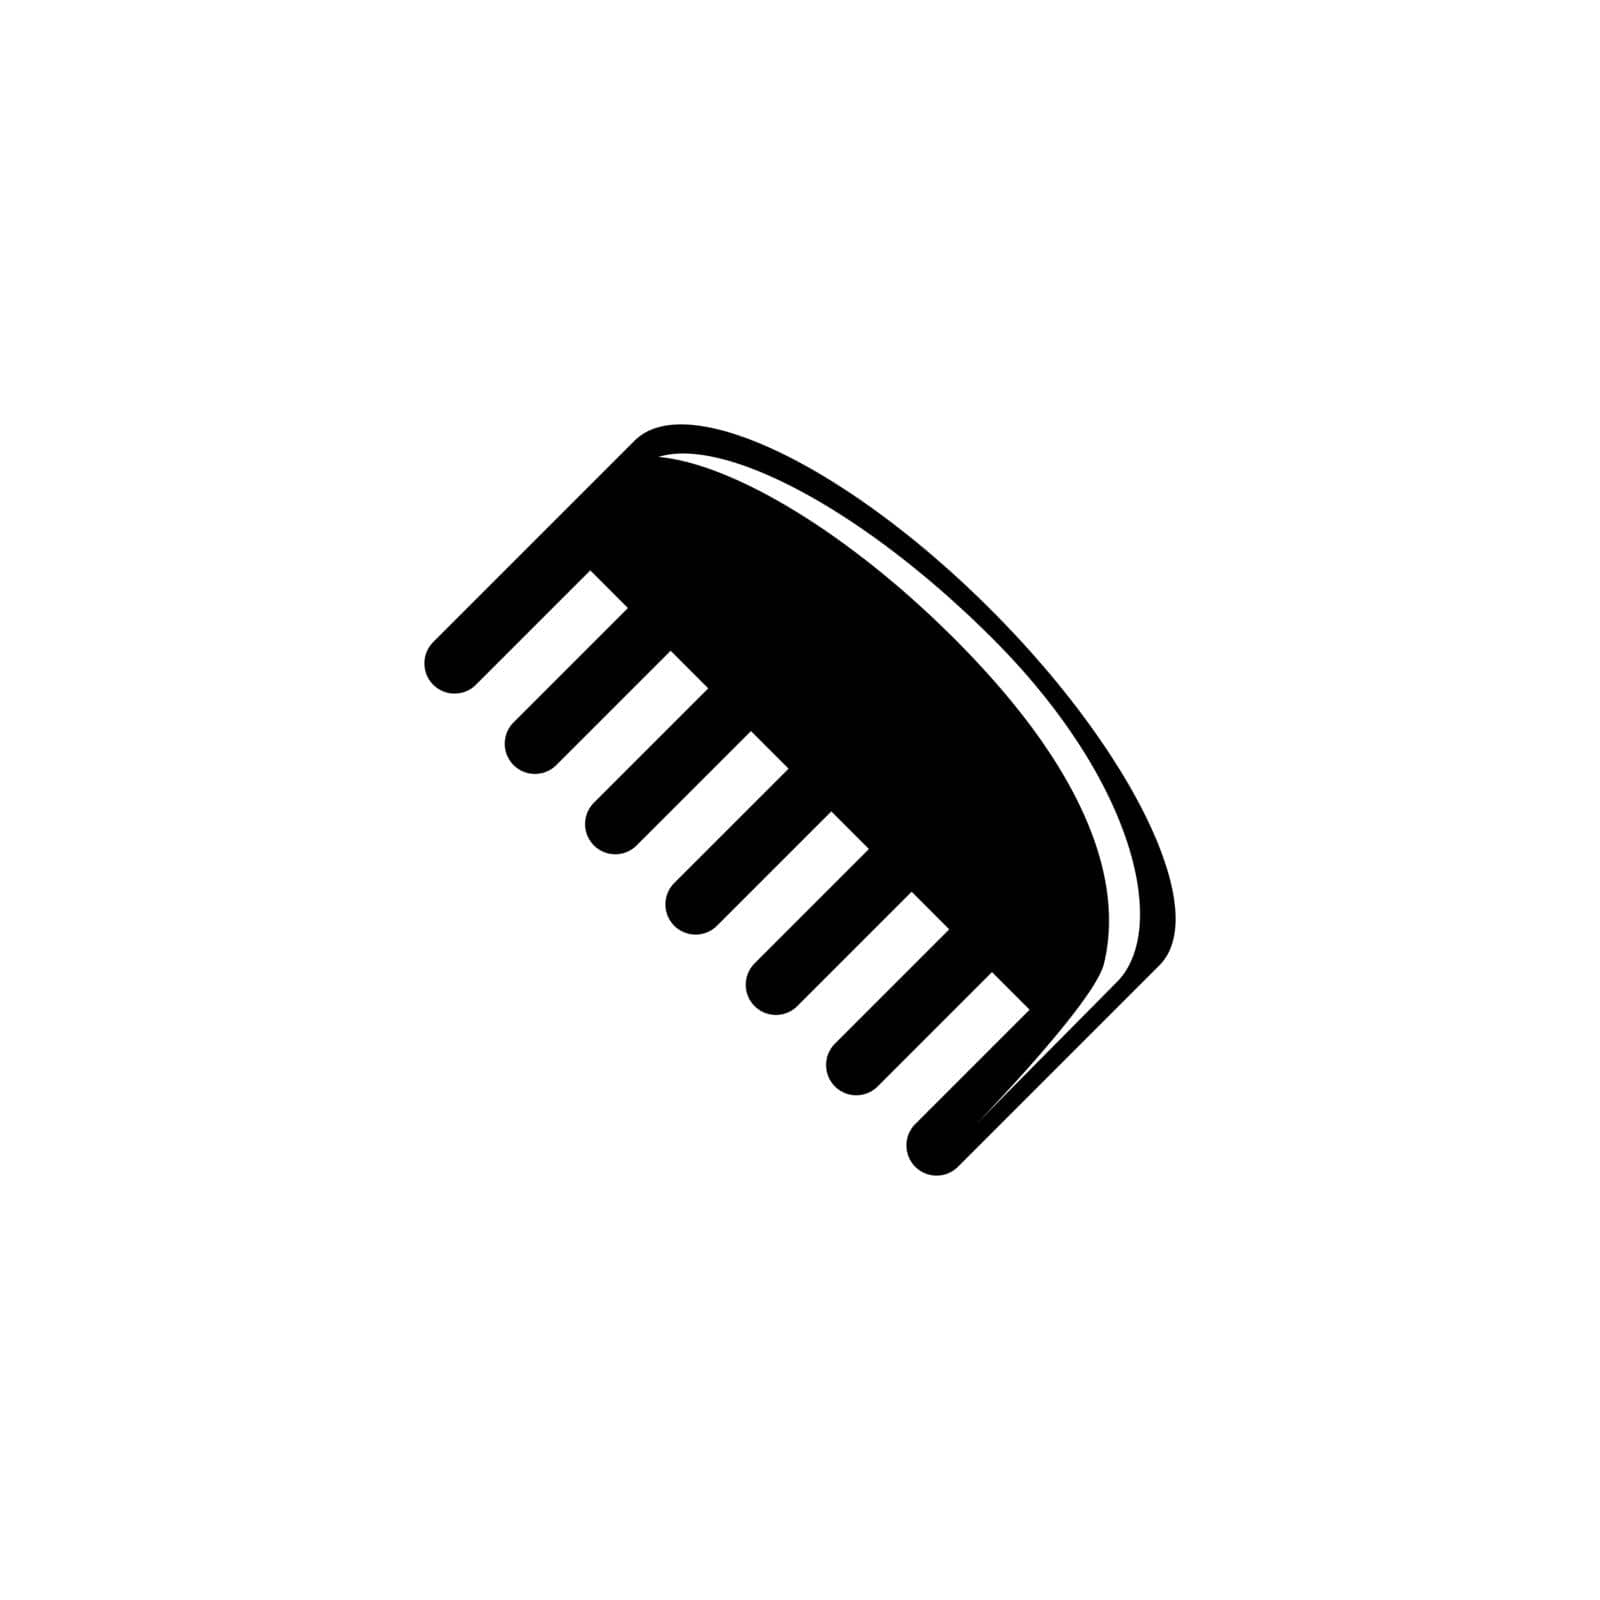 Barbershop Comb, Hairdresser Hairbrush. Flat Vector Icon illustration. Simple black symbol on white background. Barbershop Comb Hairdresser Hairbrush sign design template for web and mobile UI element by sfinks